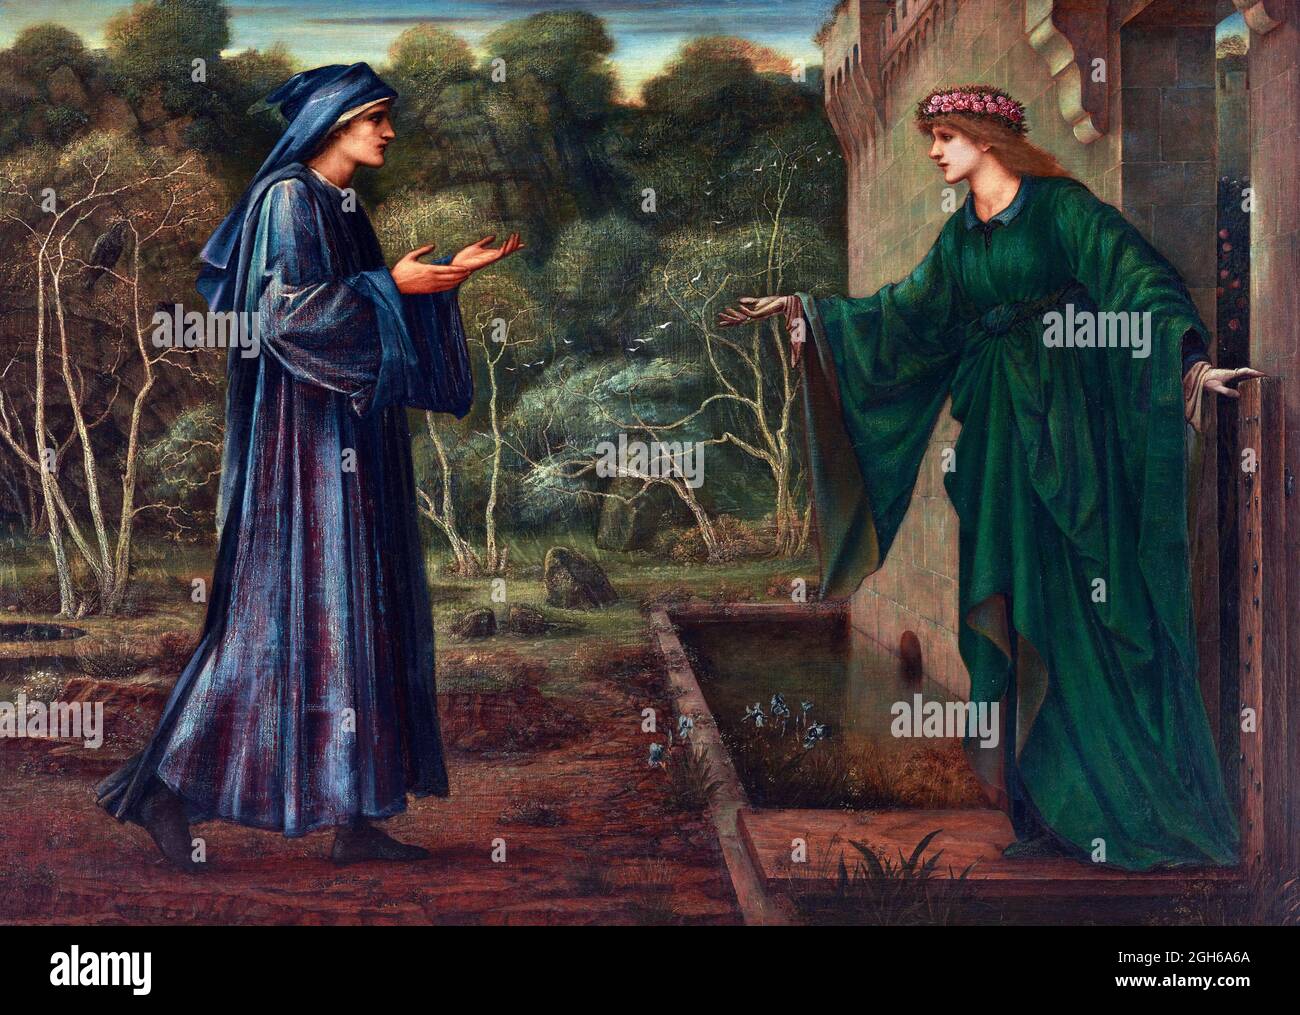 The Pilgrim at the Gate of Idleness by Edward Burne-Jones (1833-1898), oil on canvas, 1884 Stock Photo